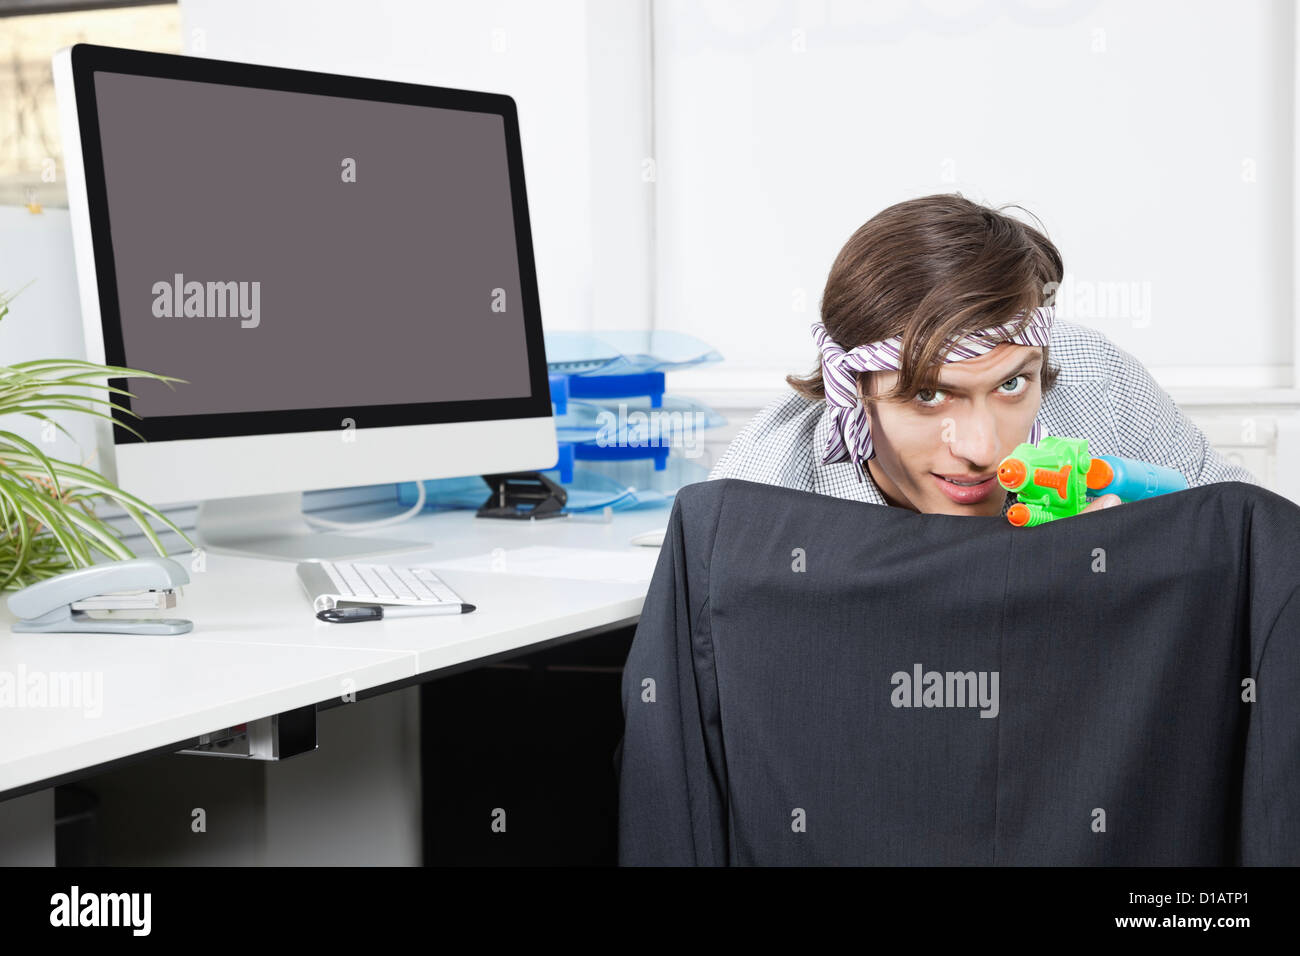 Portrait young businessman aiming toy gun at desk Stock Photo